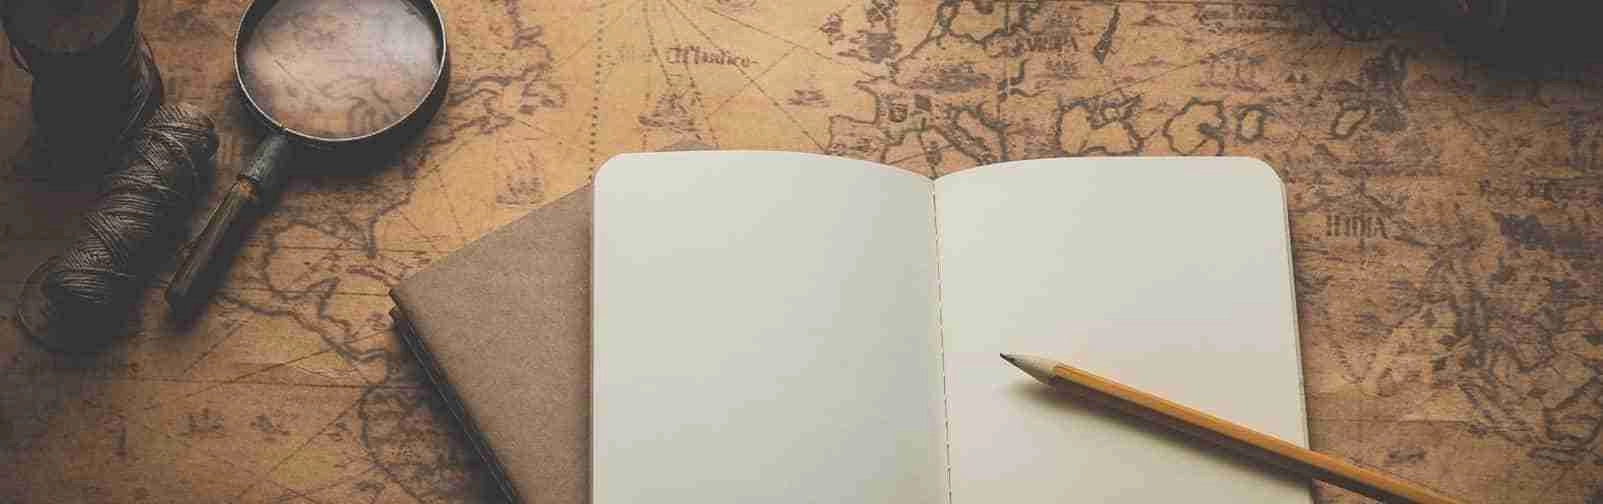 Travel Journal Ideas To Help You Get Inspired For Your Trip